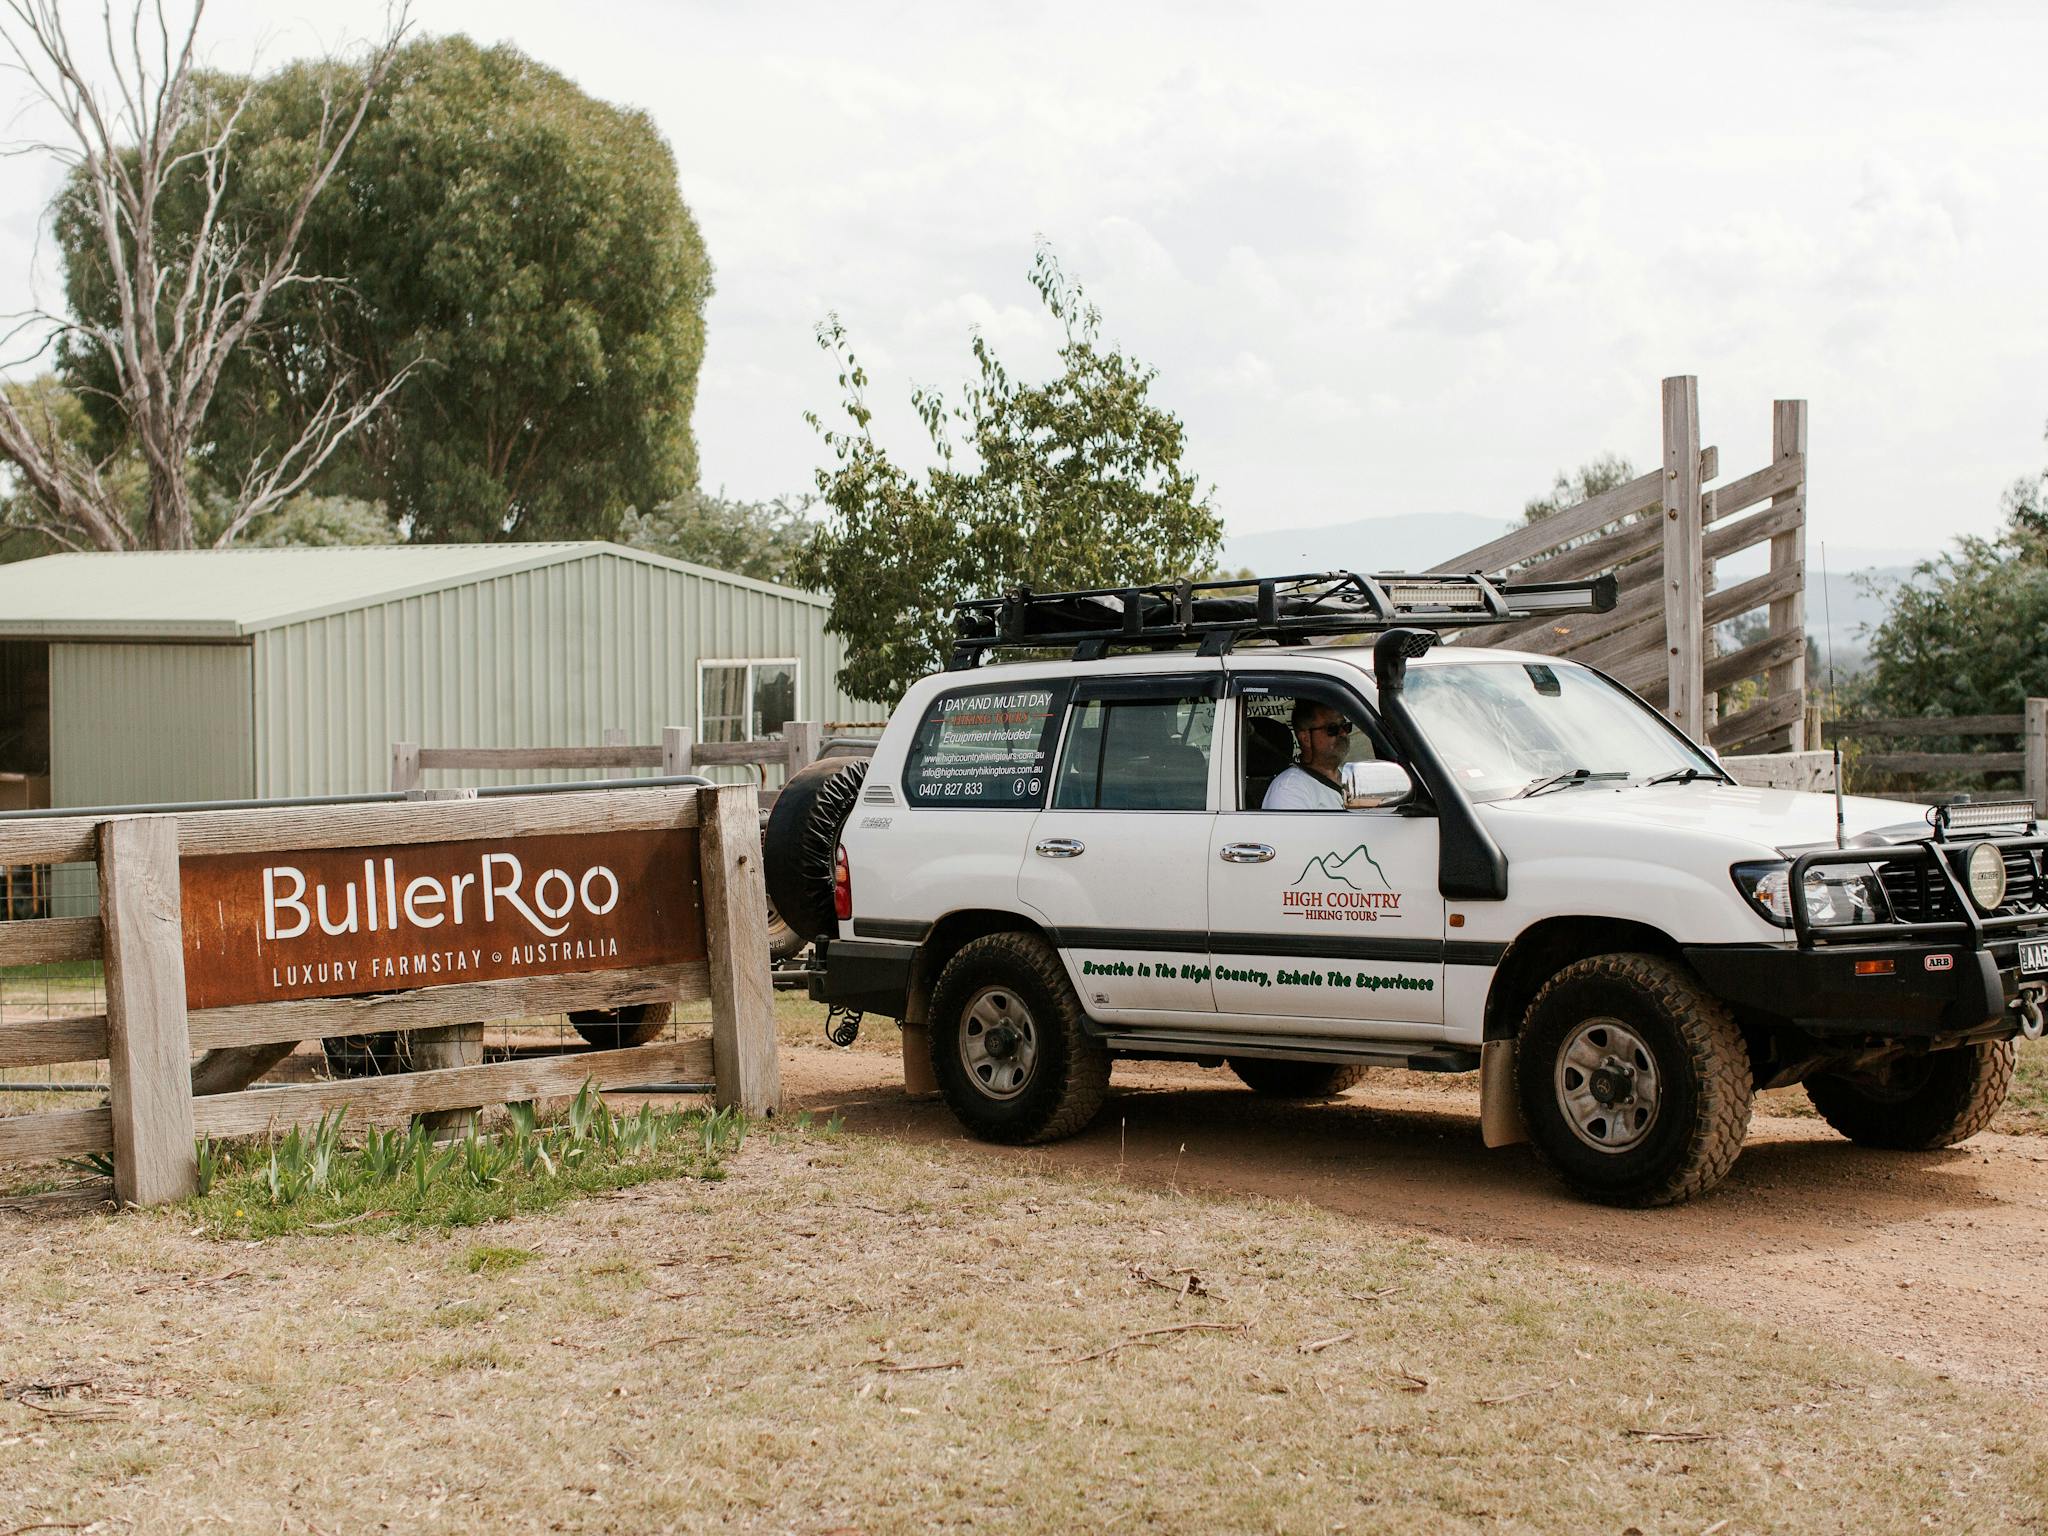 High Country Hiking Tours vehicle departing BullerRoo.